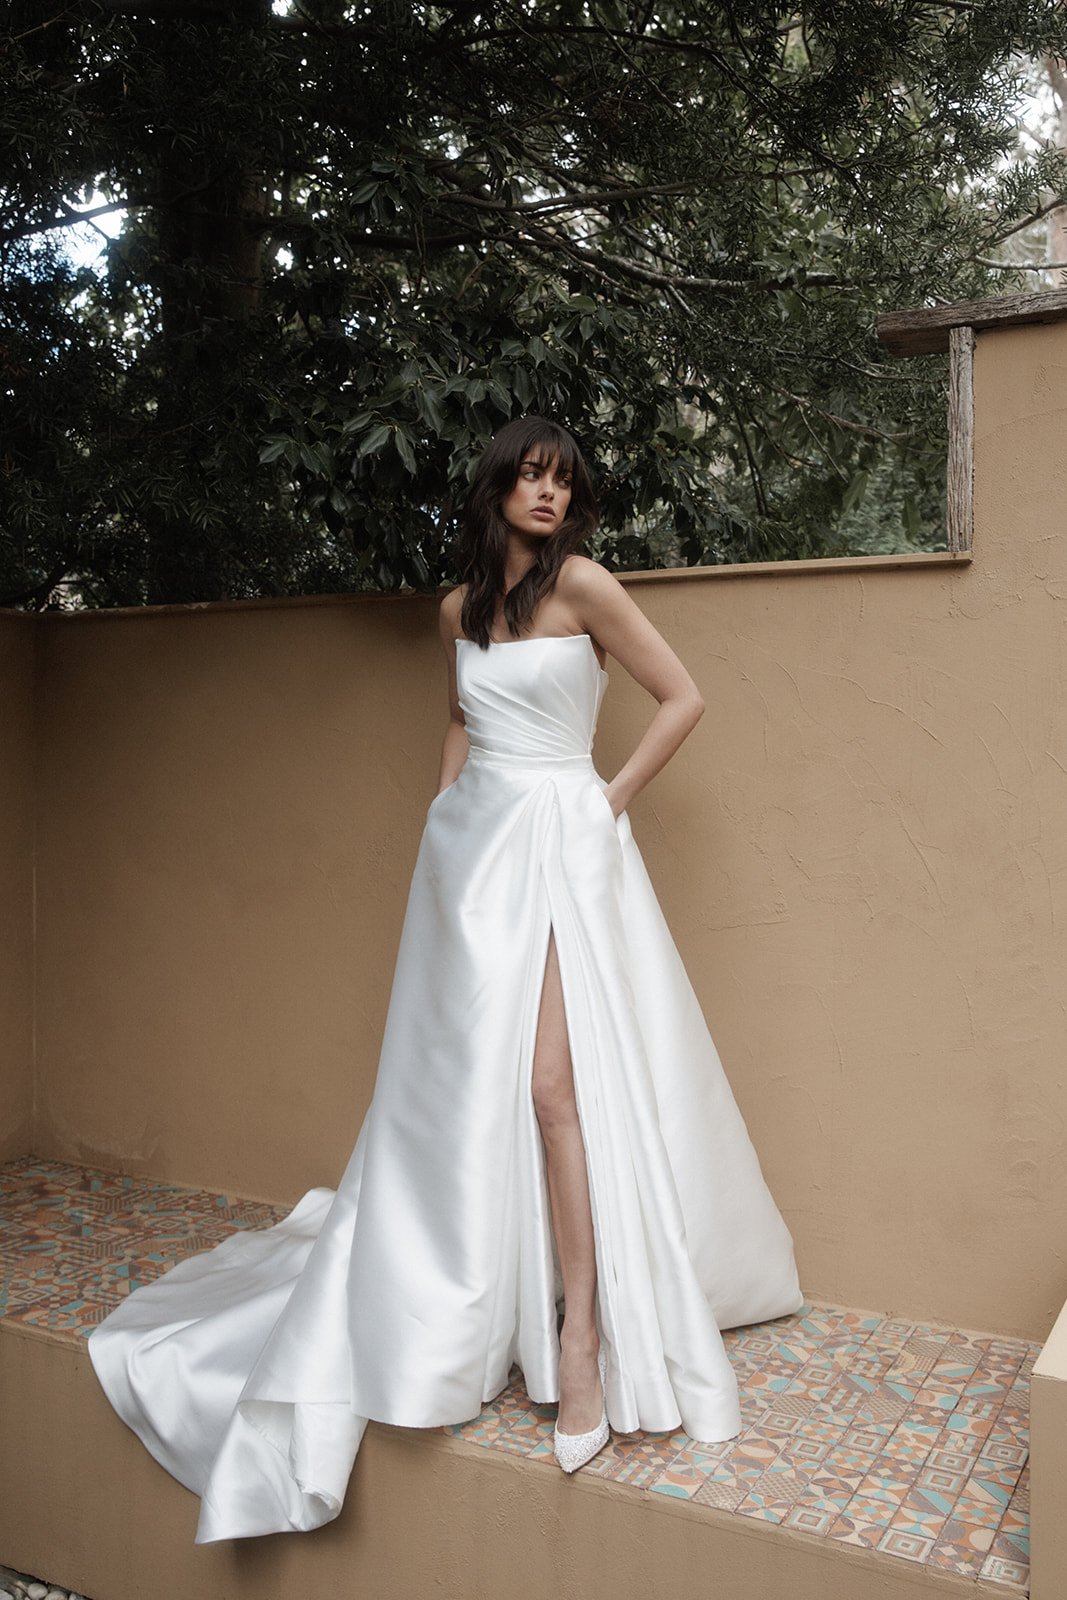 The Paris dramatic strapless gown with big skirt from Moira Hughes Couture.jpg